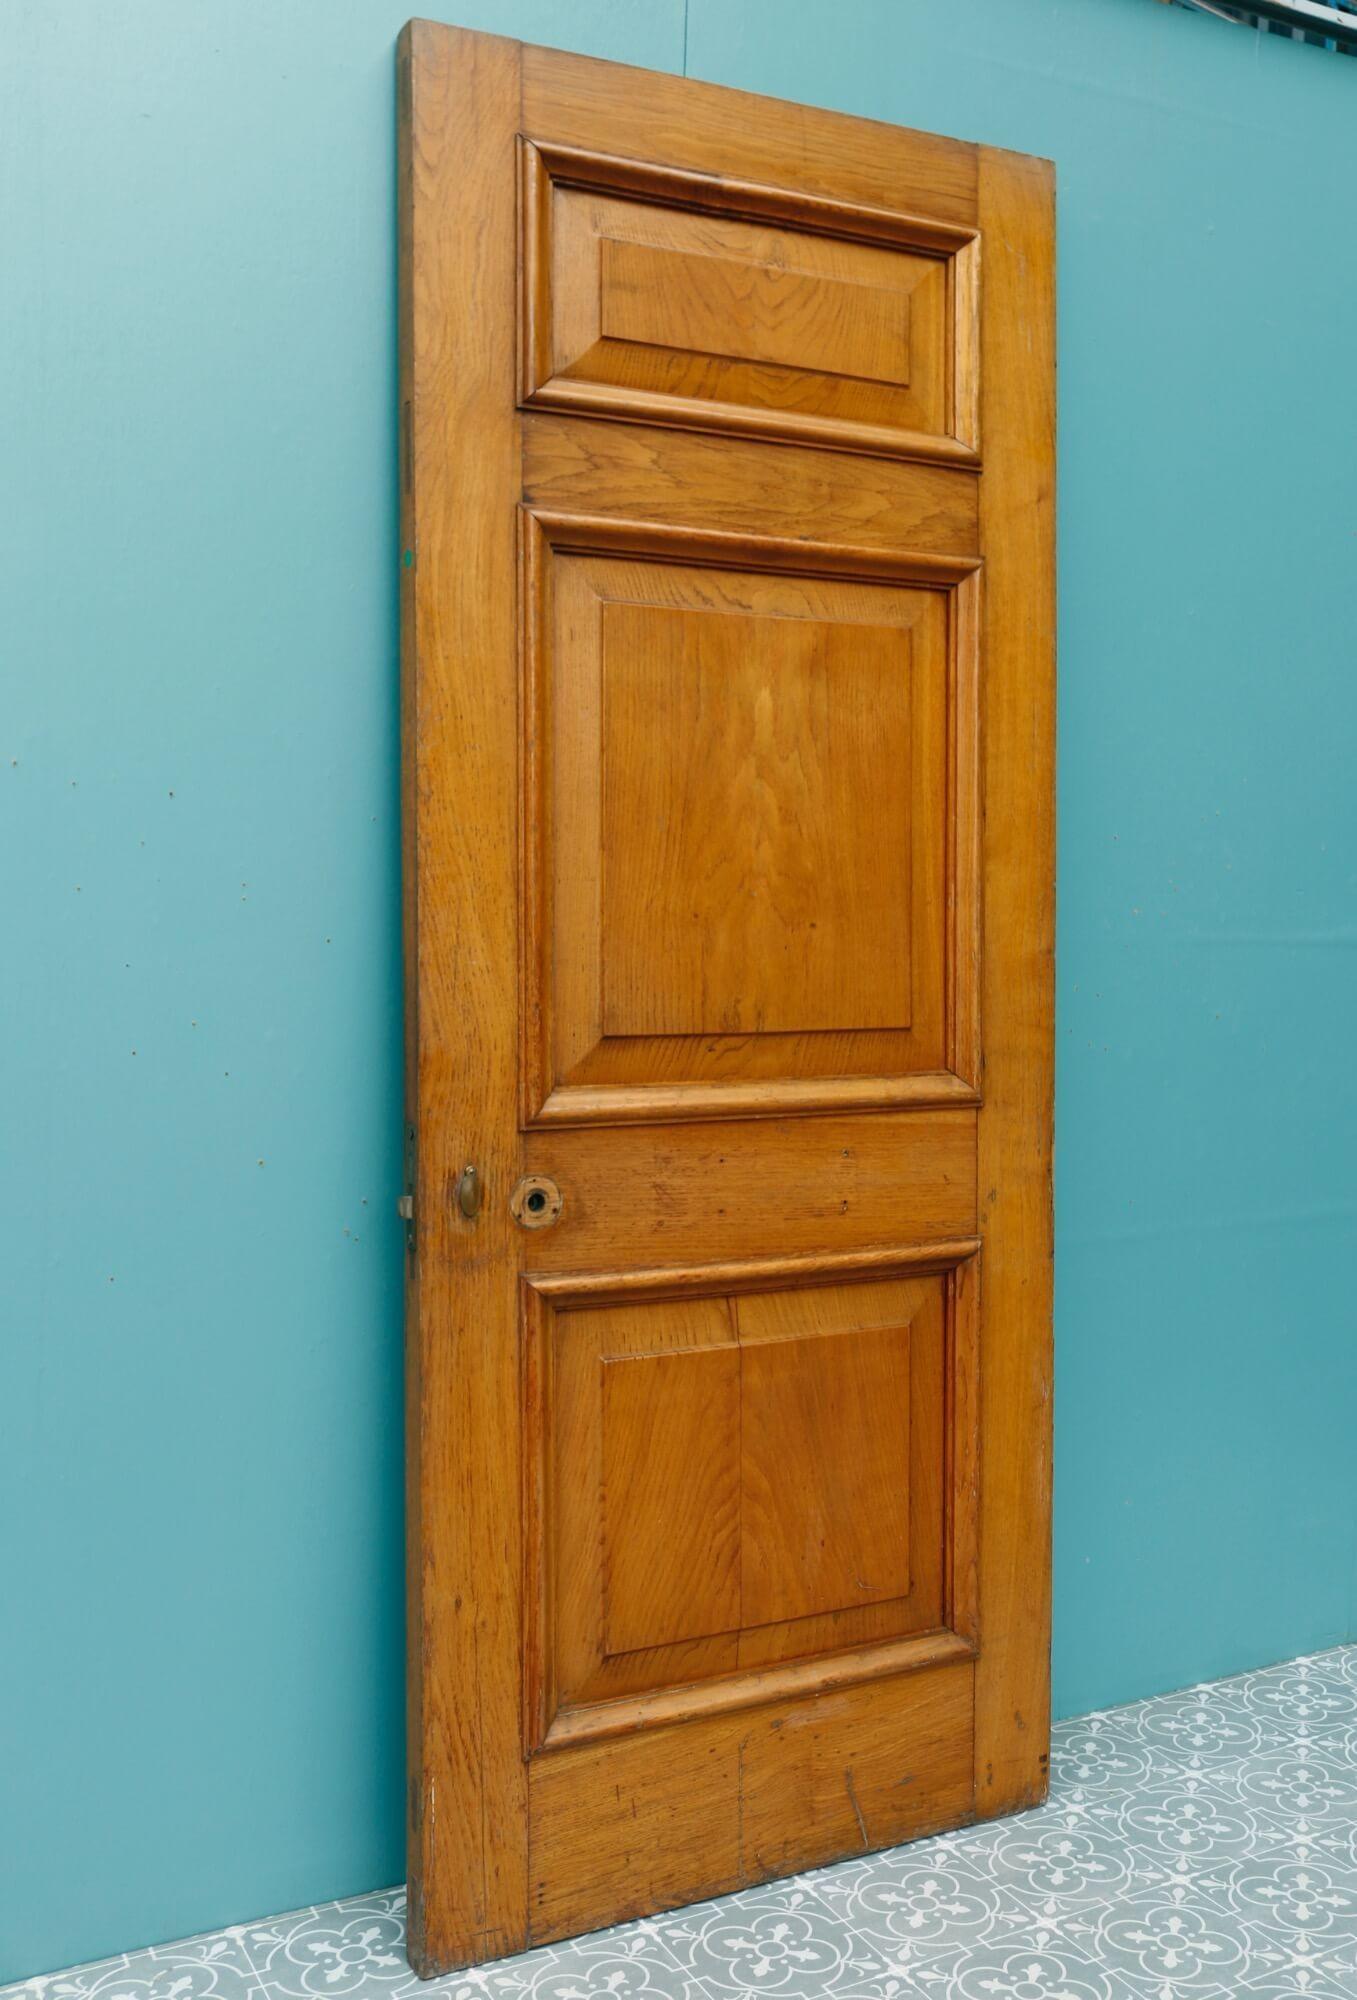 A strong and substantial reclaimed antique 1920s oak door suitable for interior or exterior use. This sturdy reclaimed oak door includes an original frame and architrave for both sides (pictured), all smartly finished with varnish that enhances the